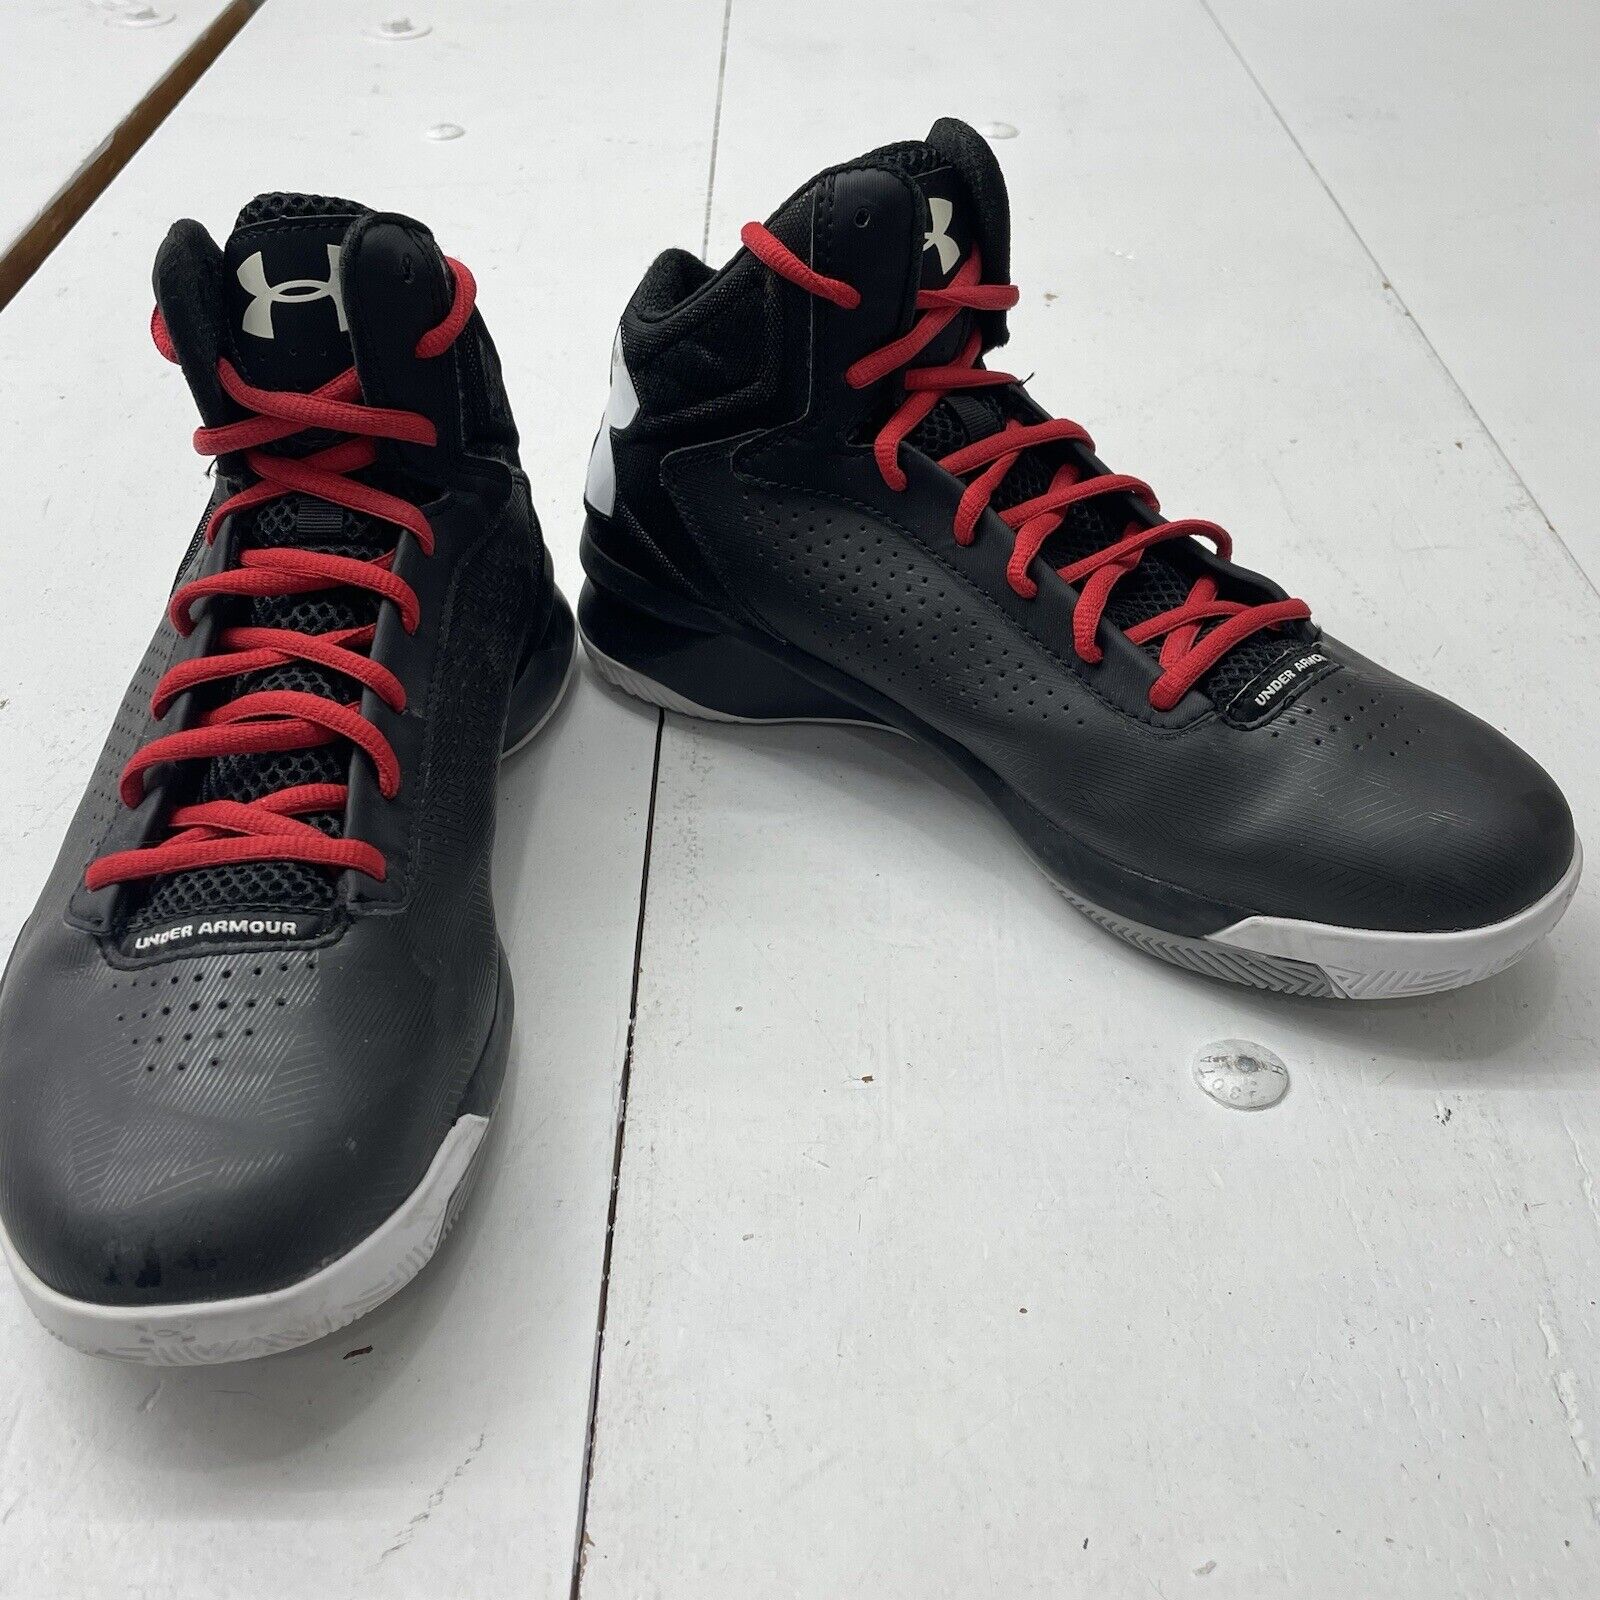 Under Armour Black Micro G Torch Basketball Shoes 1259034-001 Womens Size 10